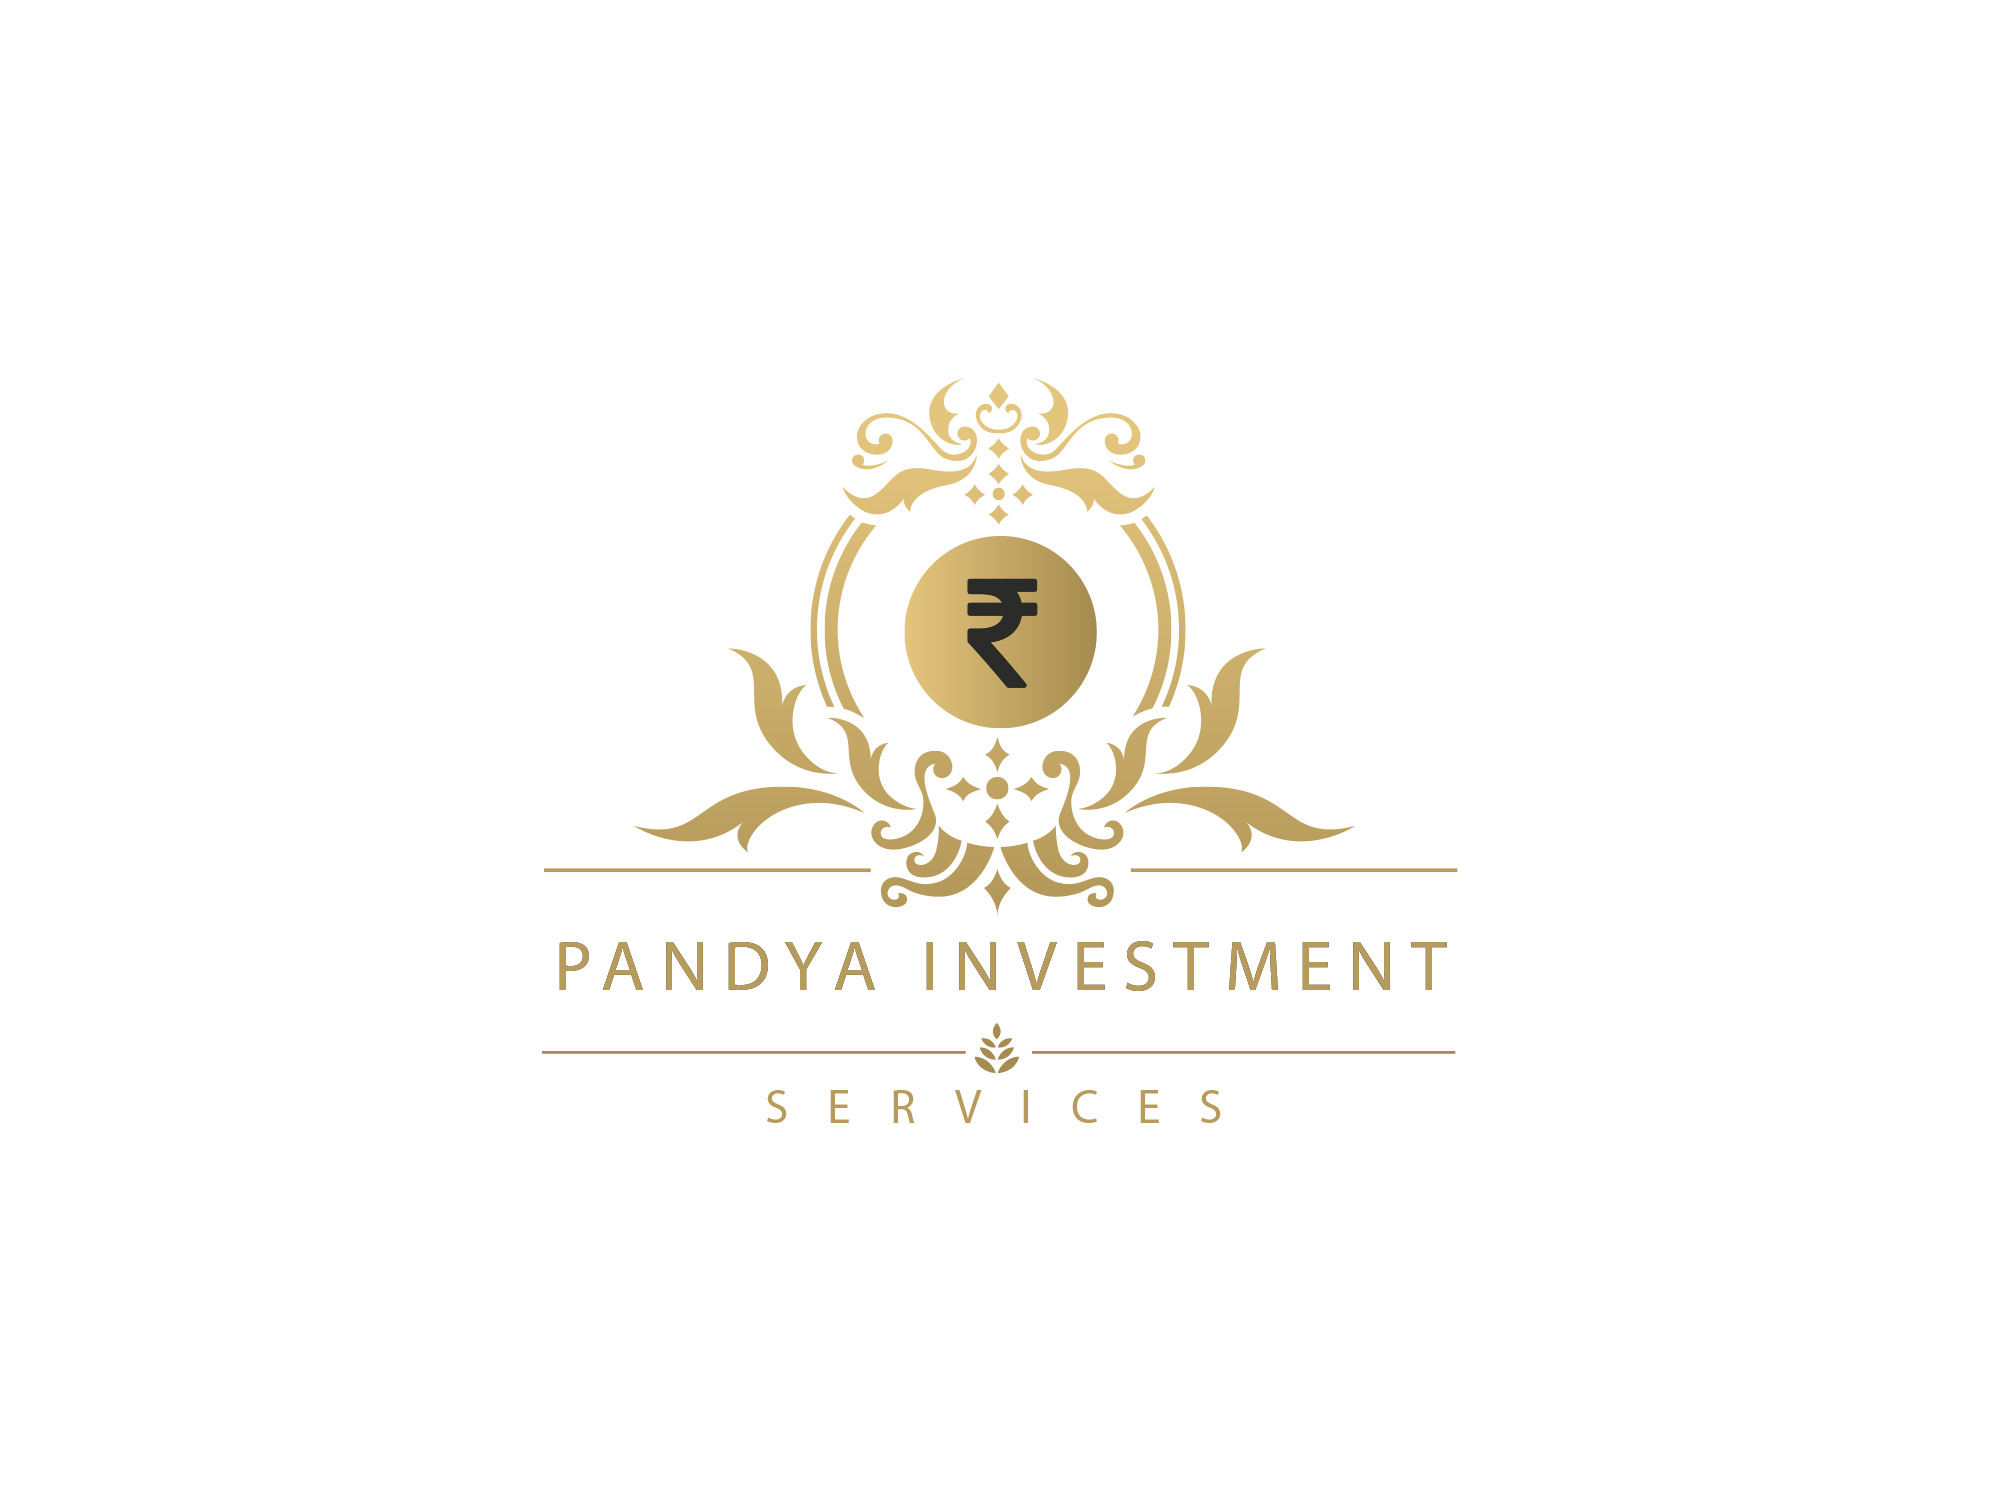 Pandya Investment Logo Designing - XpertLab Technolgoies Private Limited